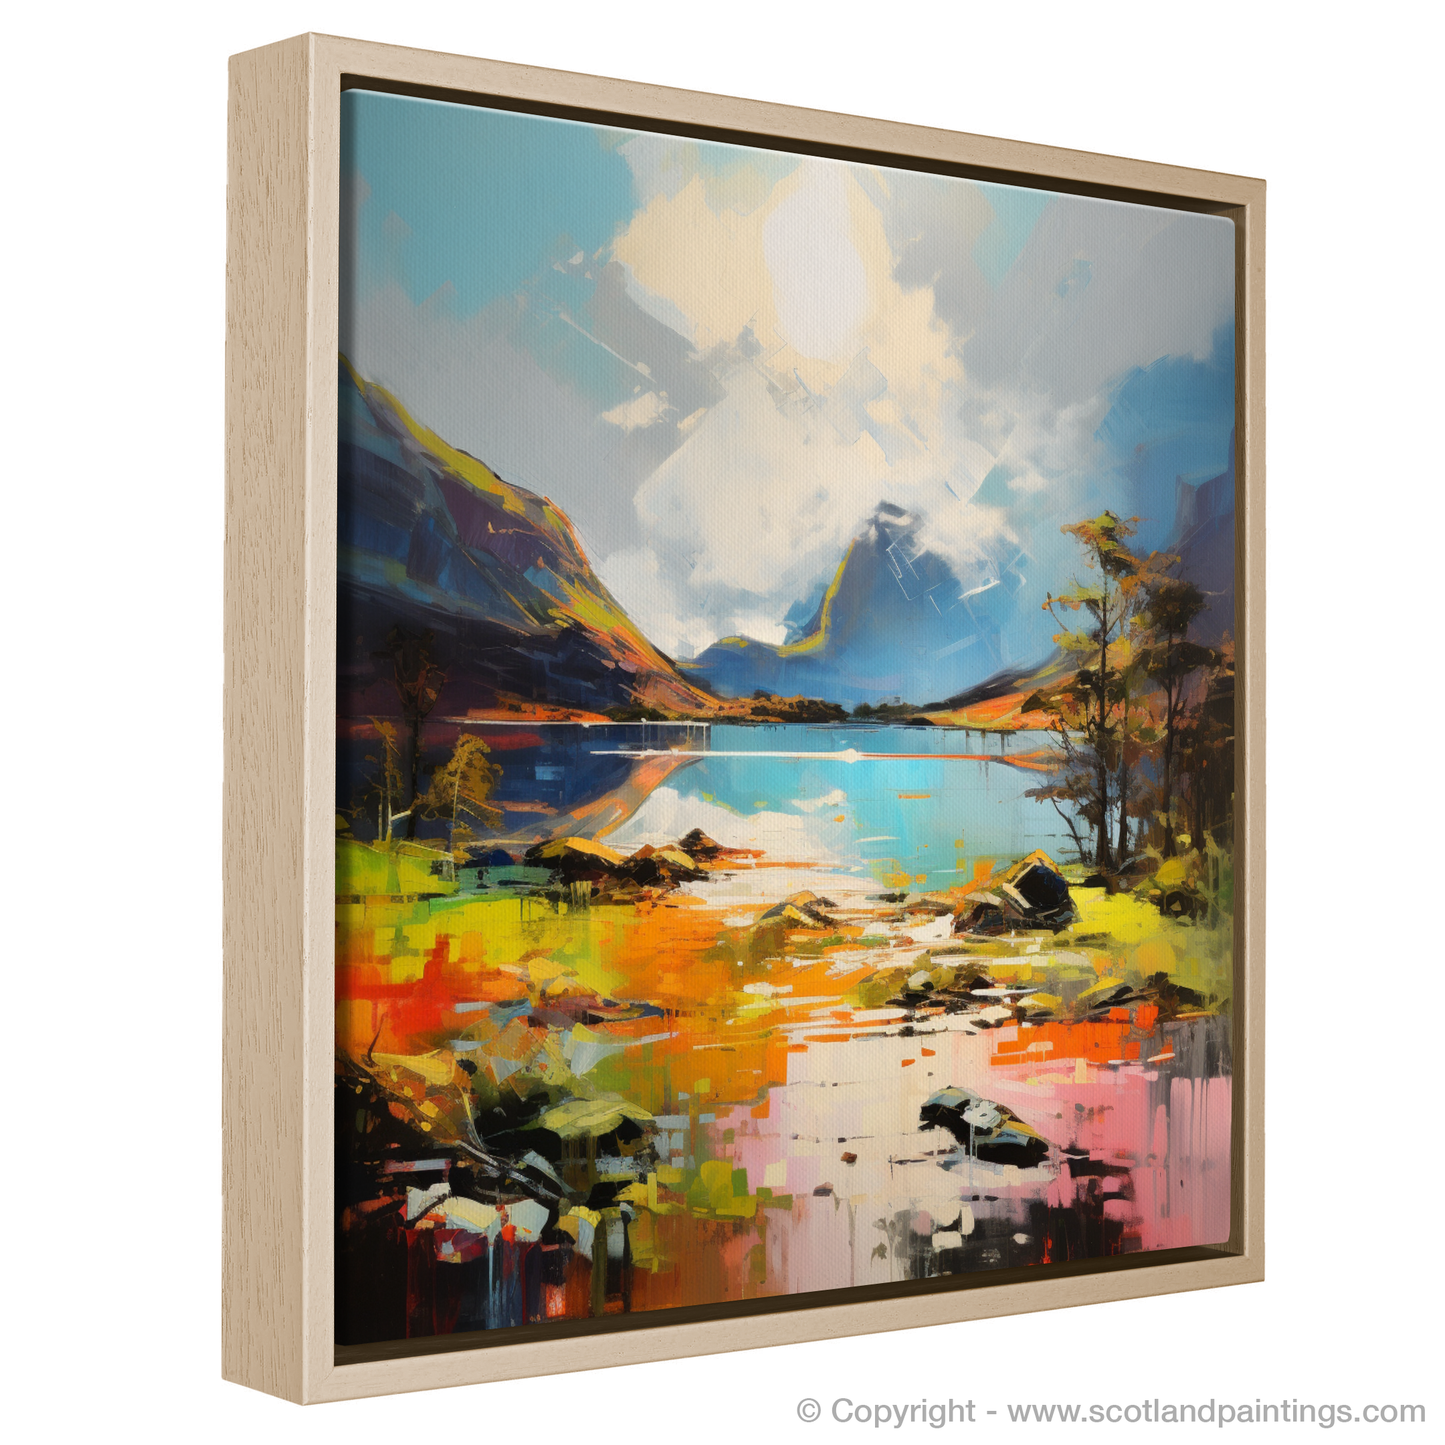 Painting and Art Print of Loch Maree, Wester Ross in summer entitled "Summer's Embrace at Loch Maree".